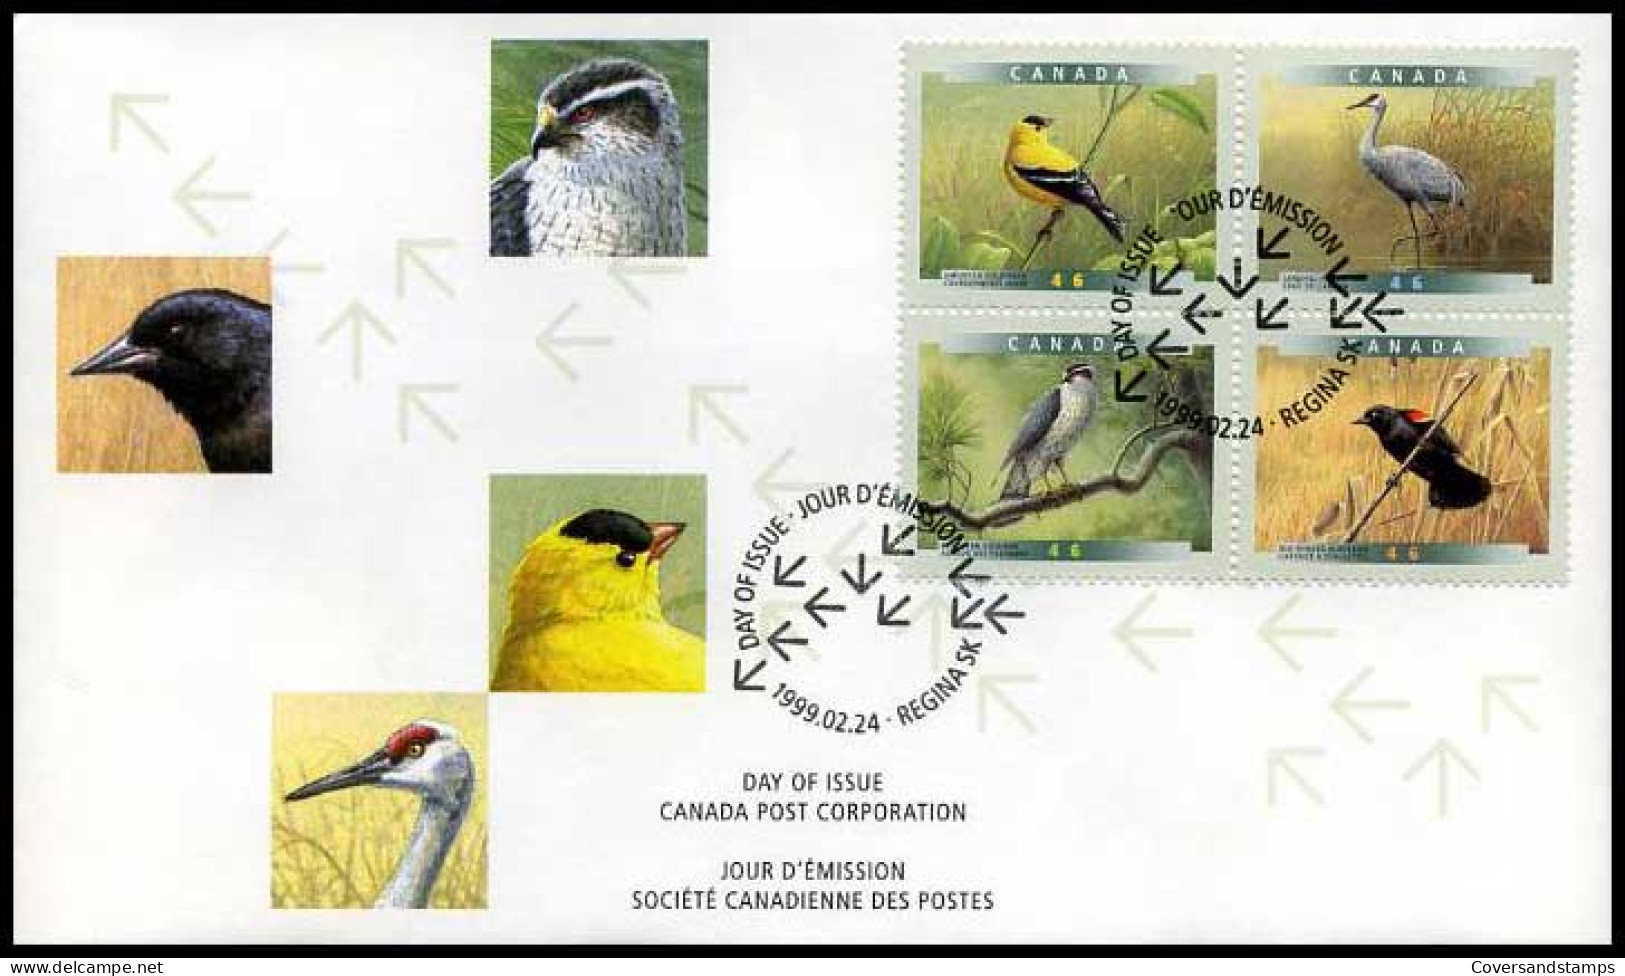 Canada - FDC -  Vogels                                    - 1991-2000